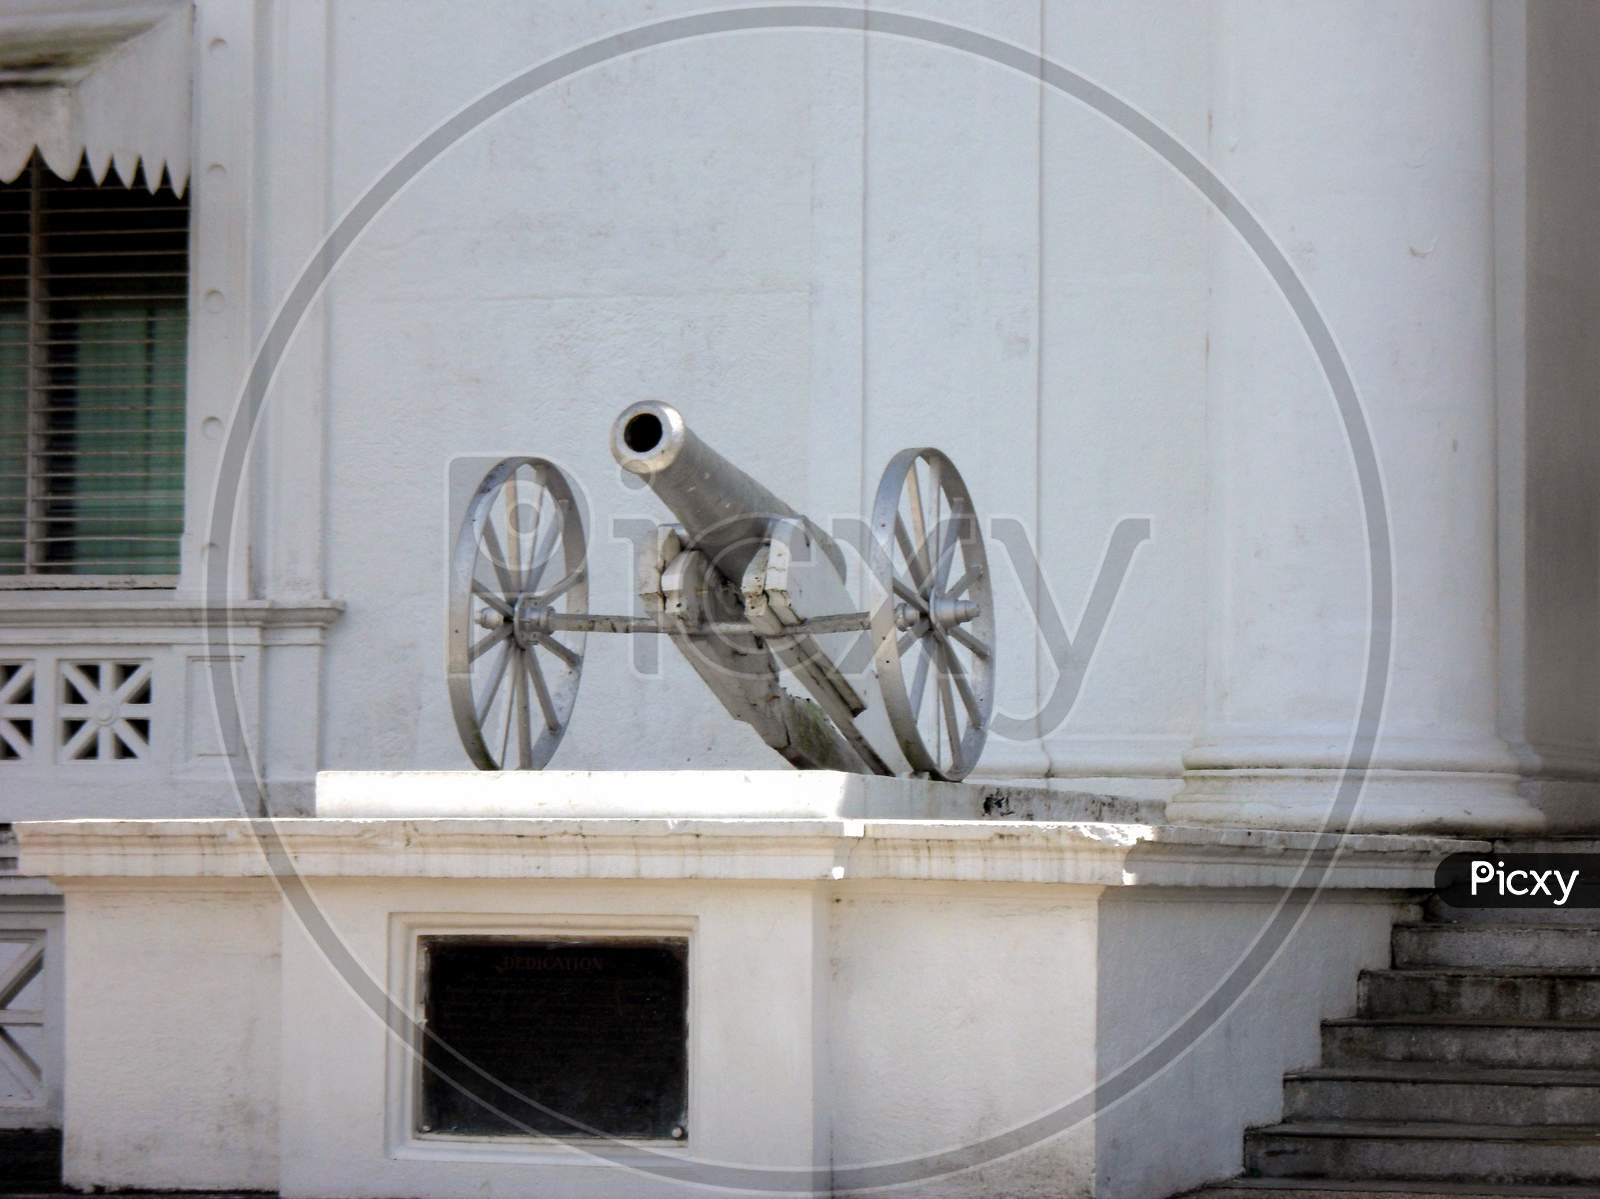 Cannon Exhibited In Leyte On The Philippines January 21, 2012